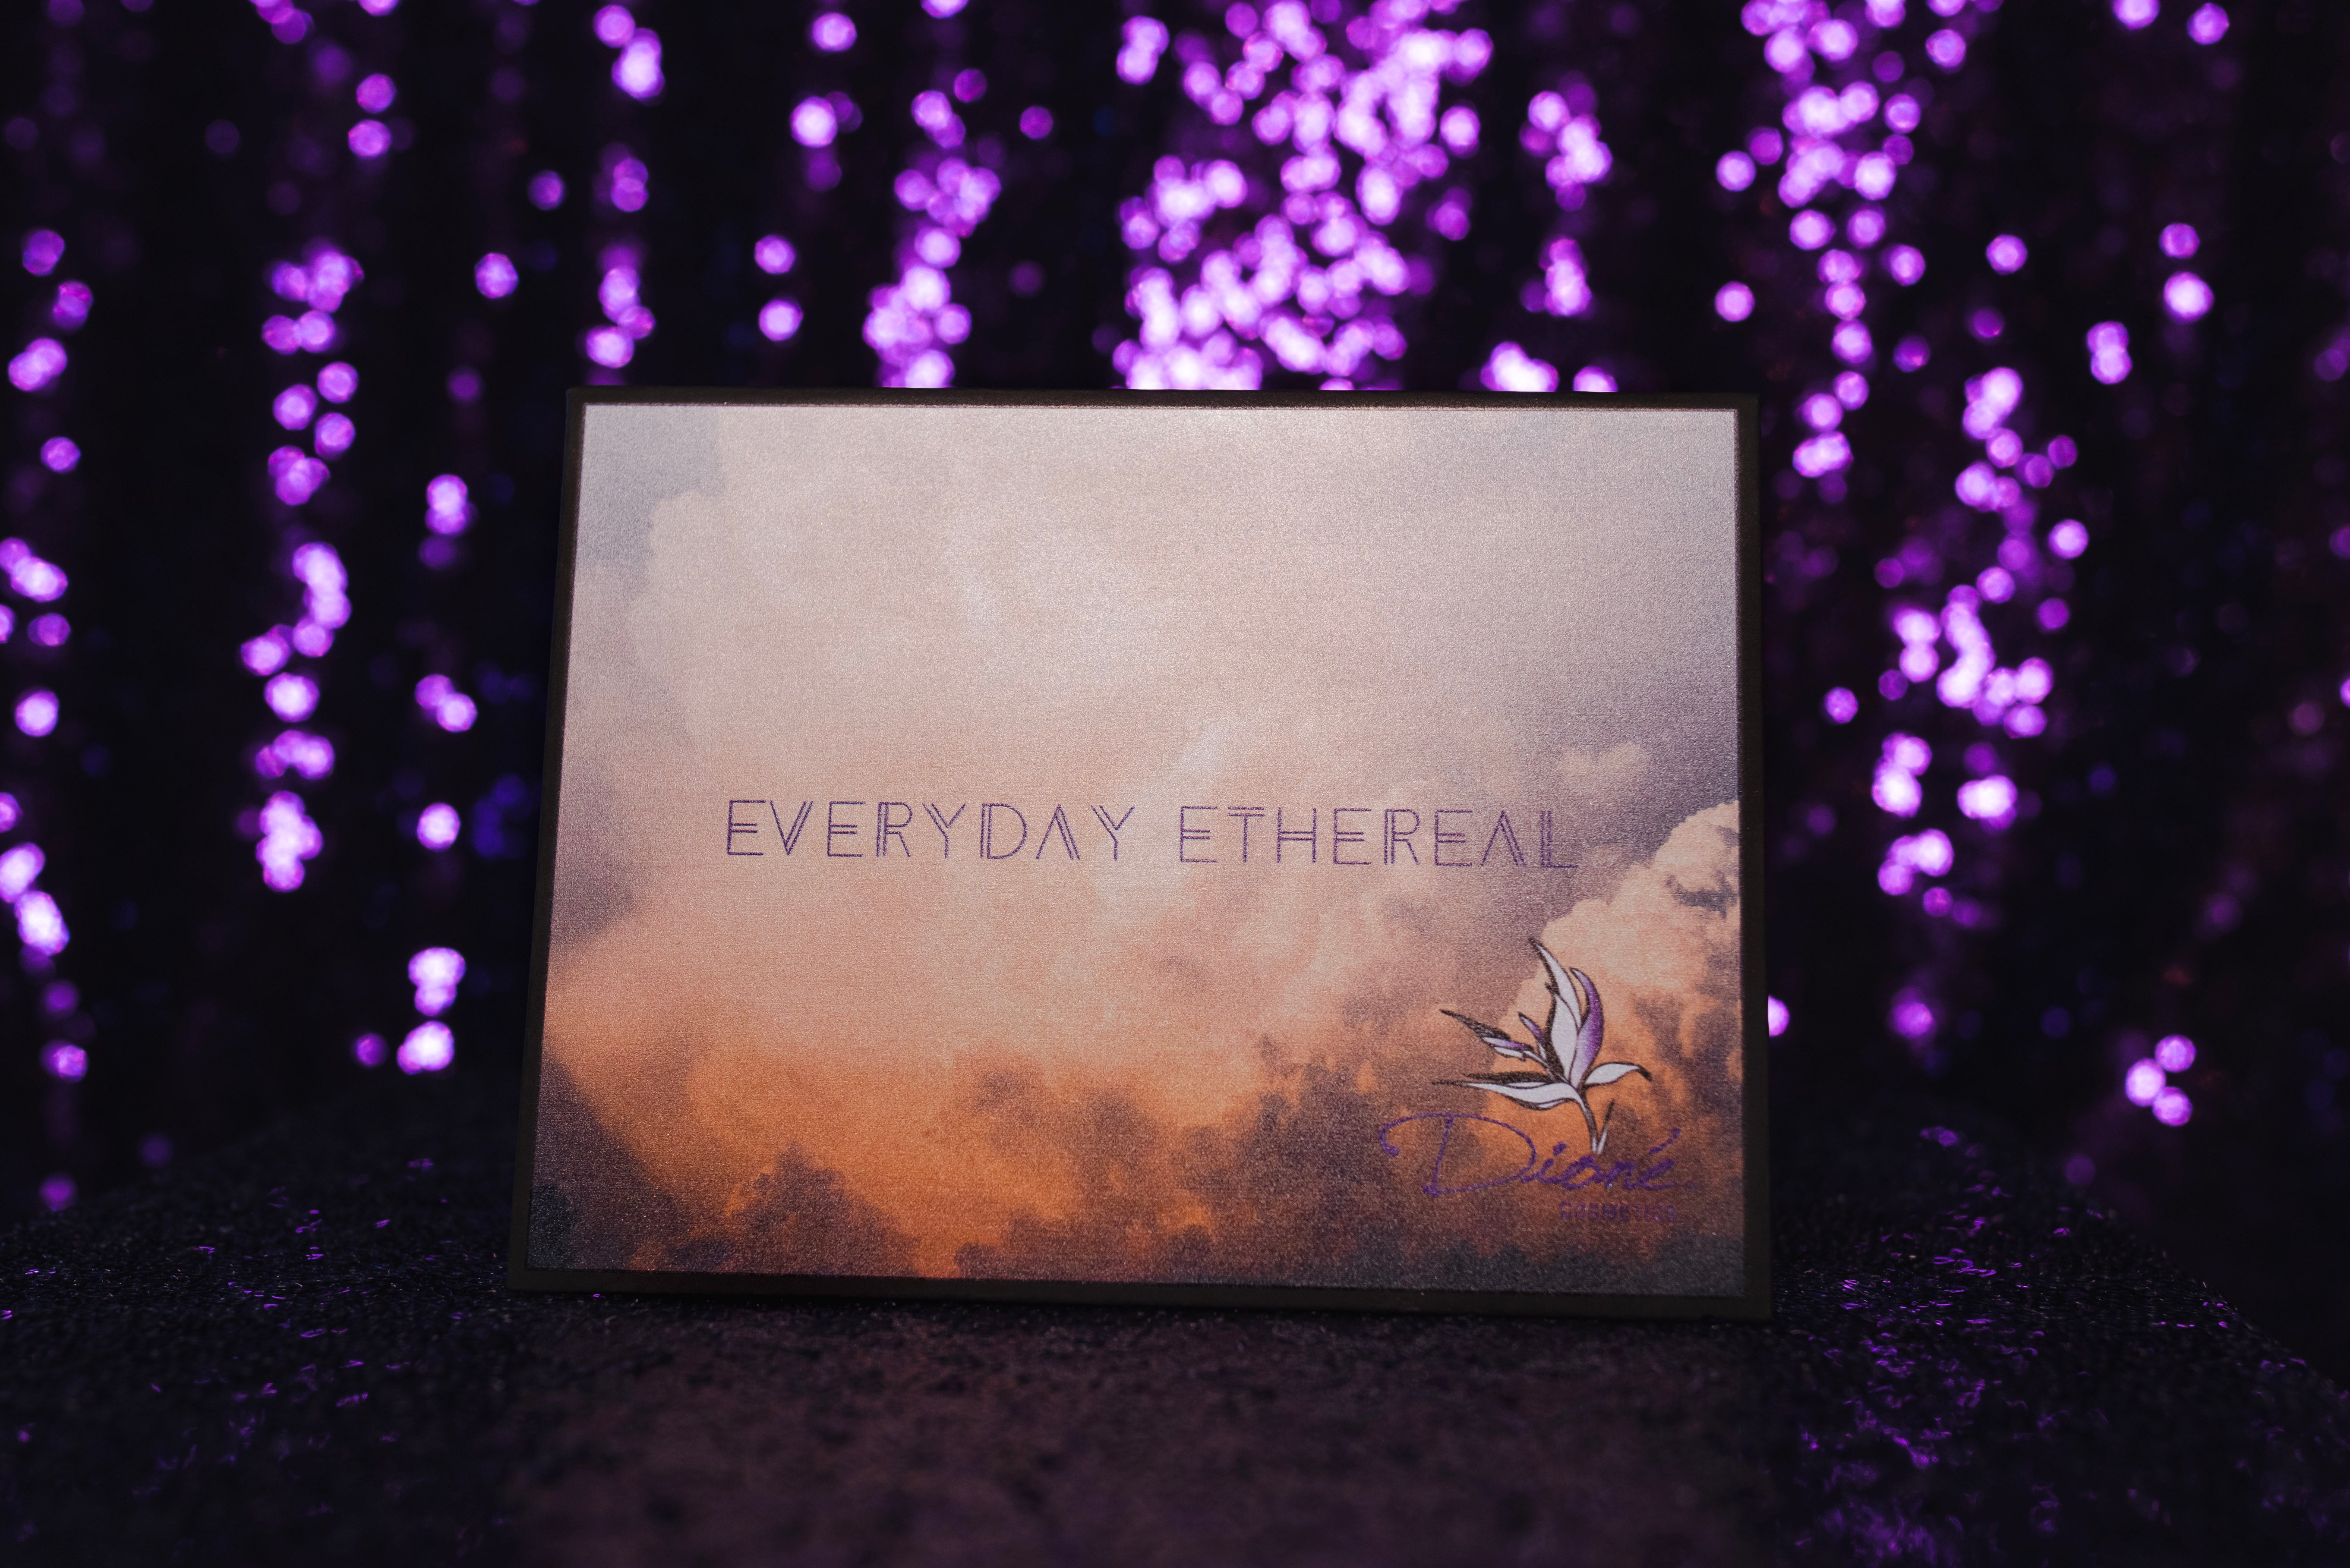 Fundraising "Everyday Ethereal" Palette